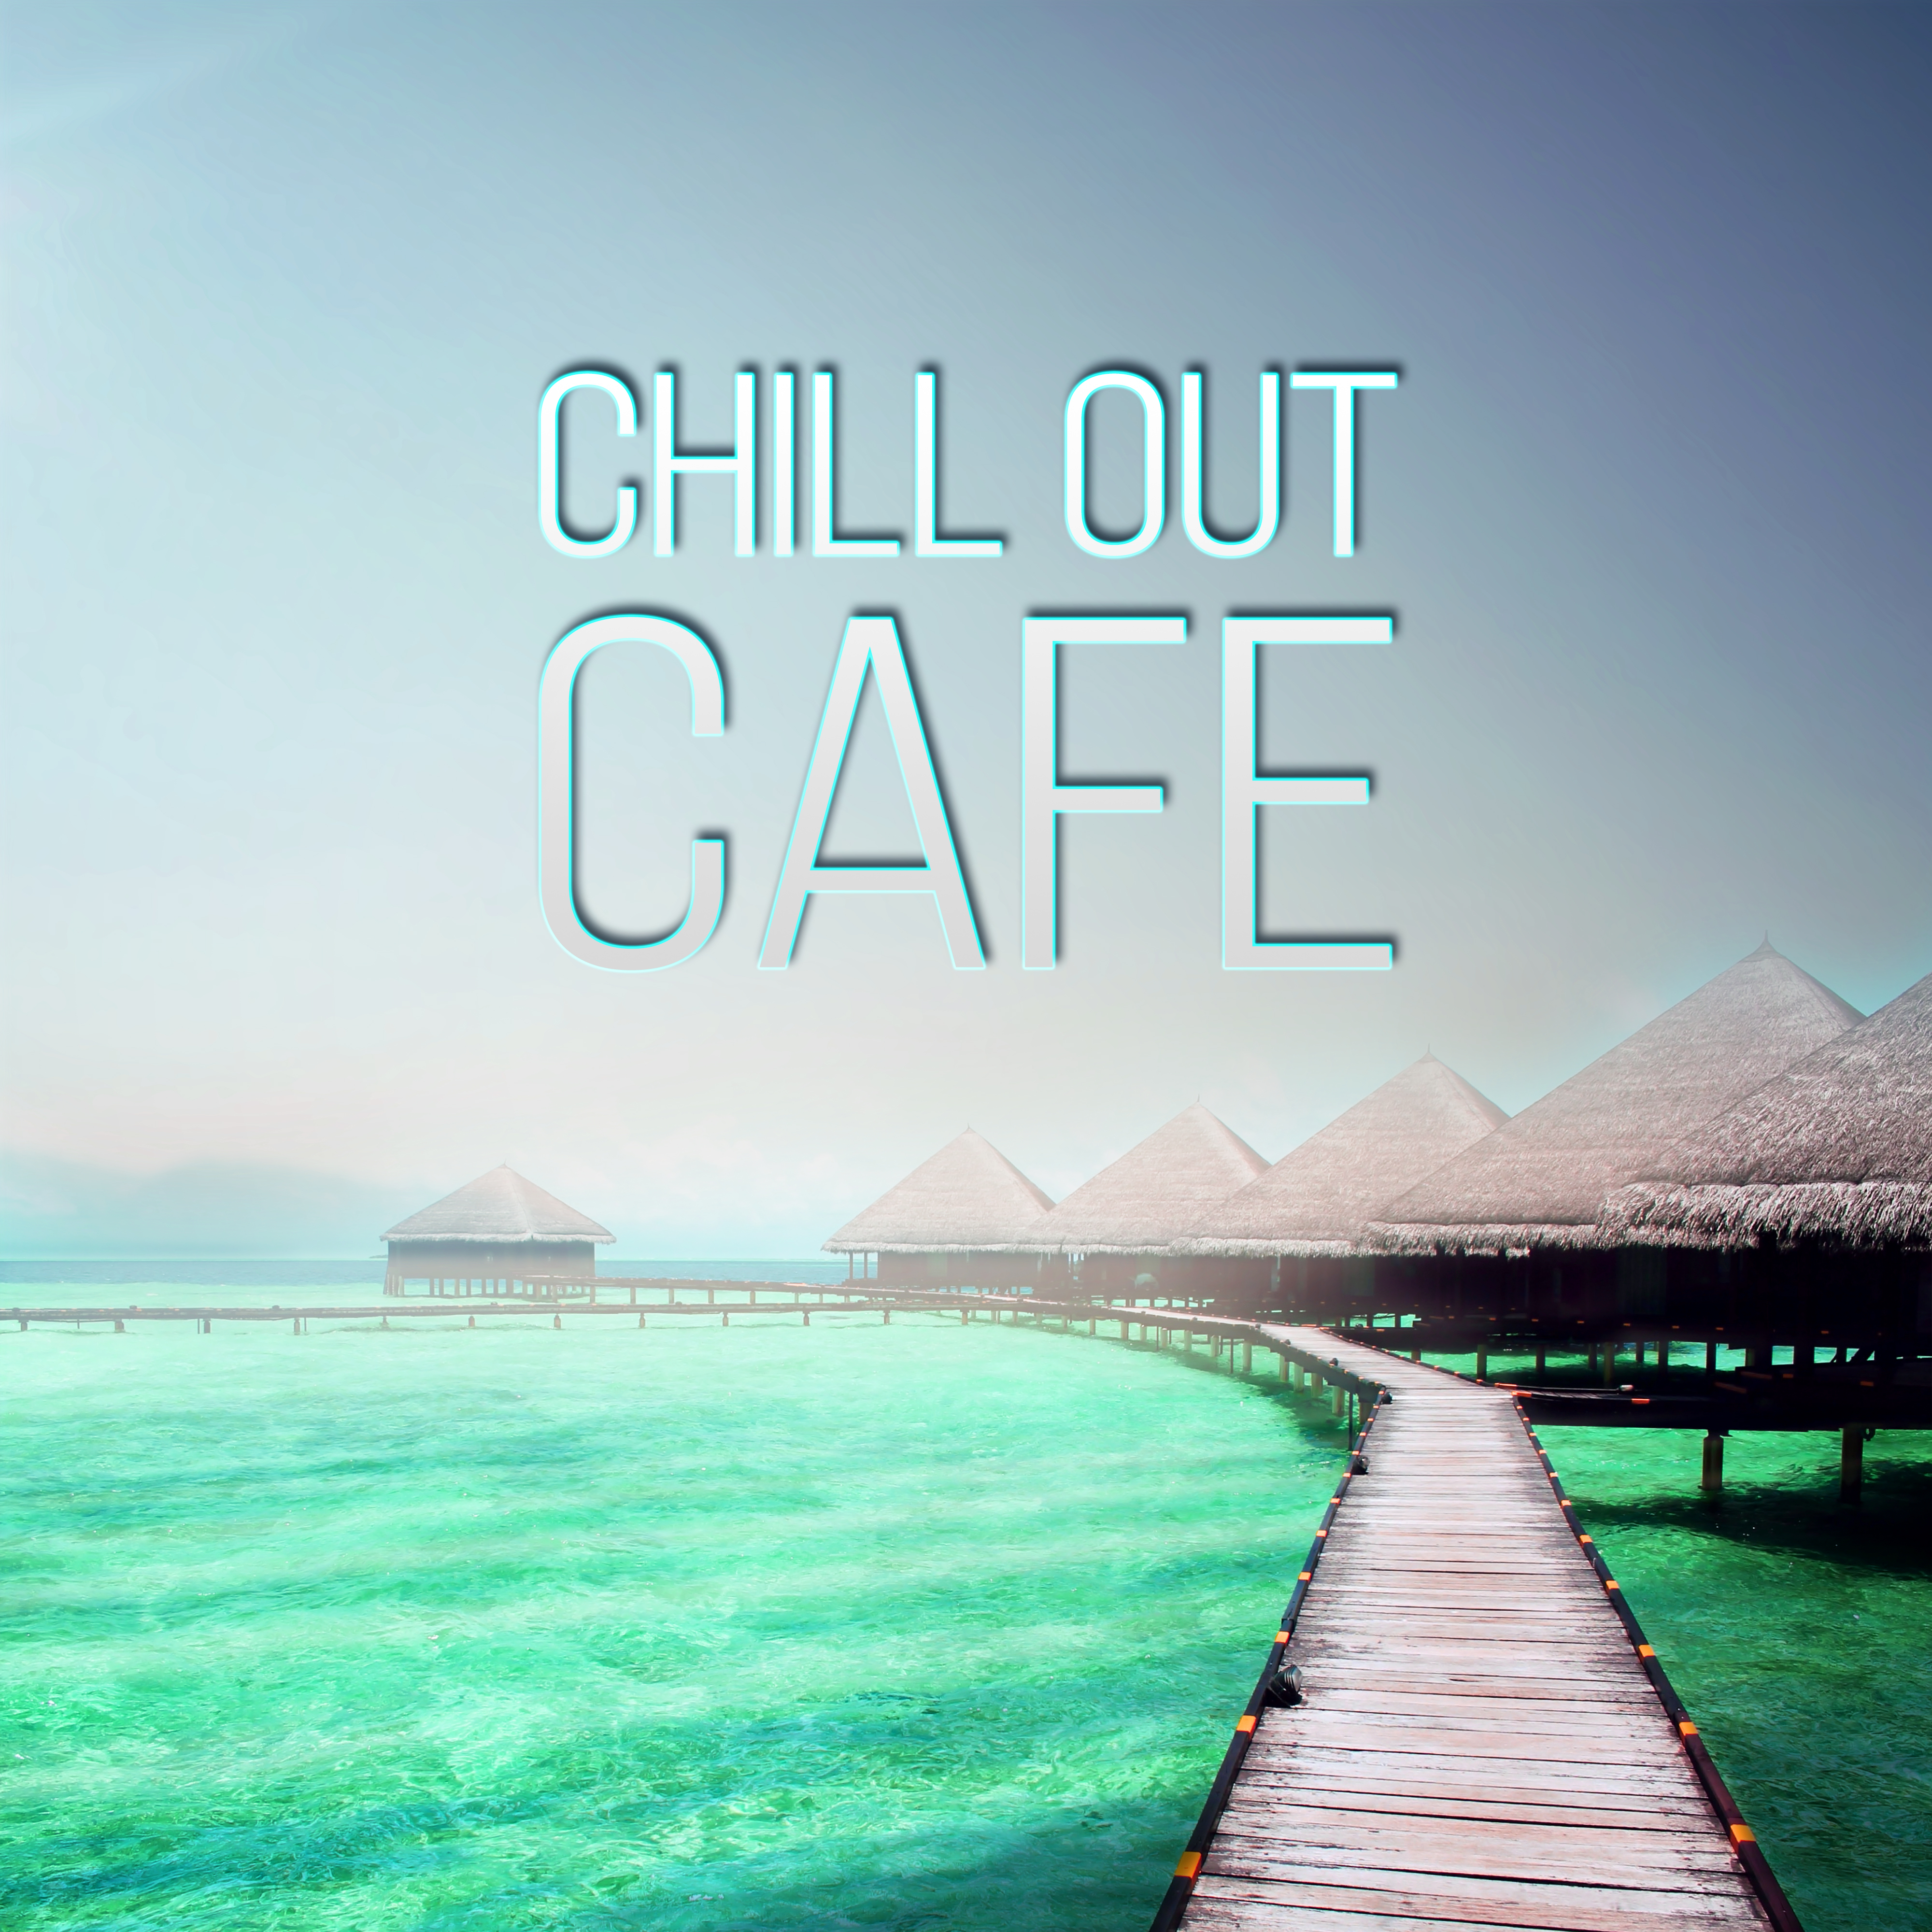 Chill Out Cafe - 30 Chillout Tunes, Summertime Ibiza Party, Beach House Chillout Music, Lounge Bar with Electronic Music